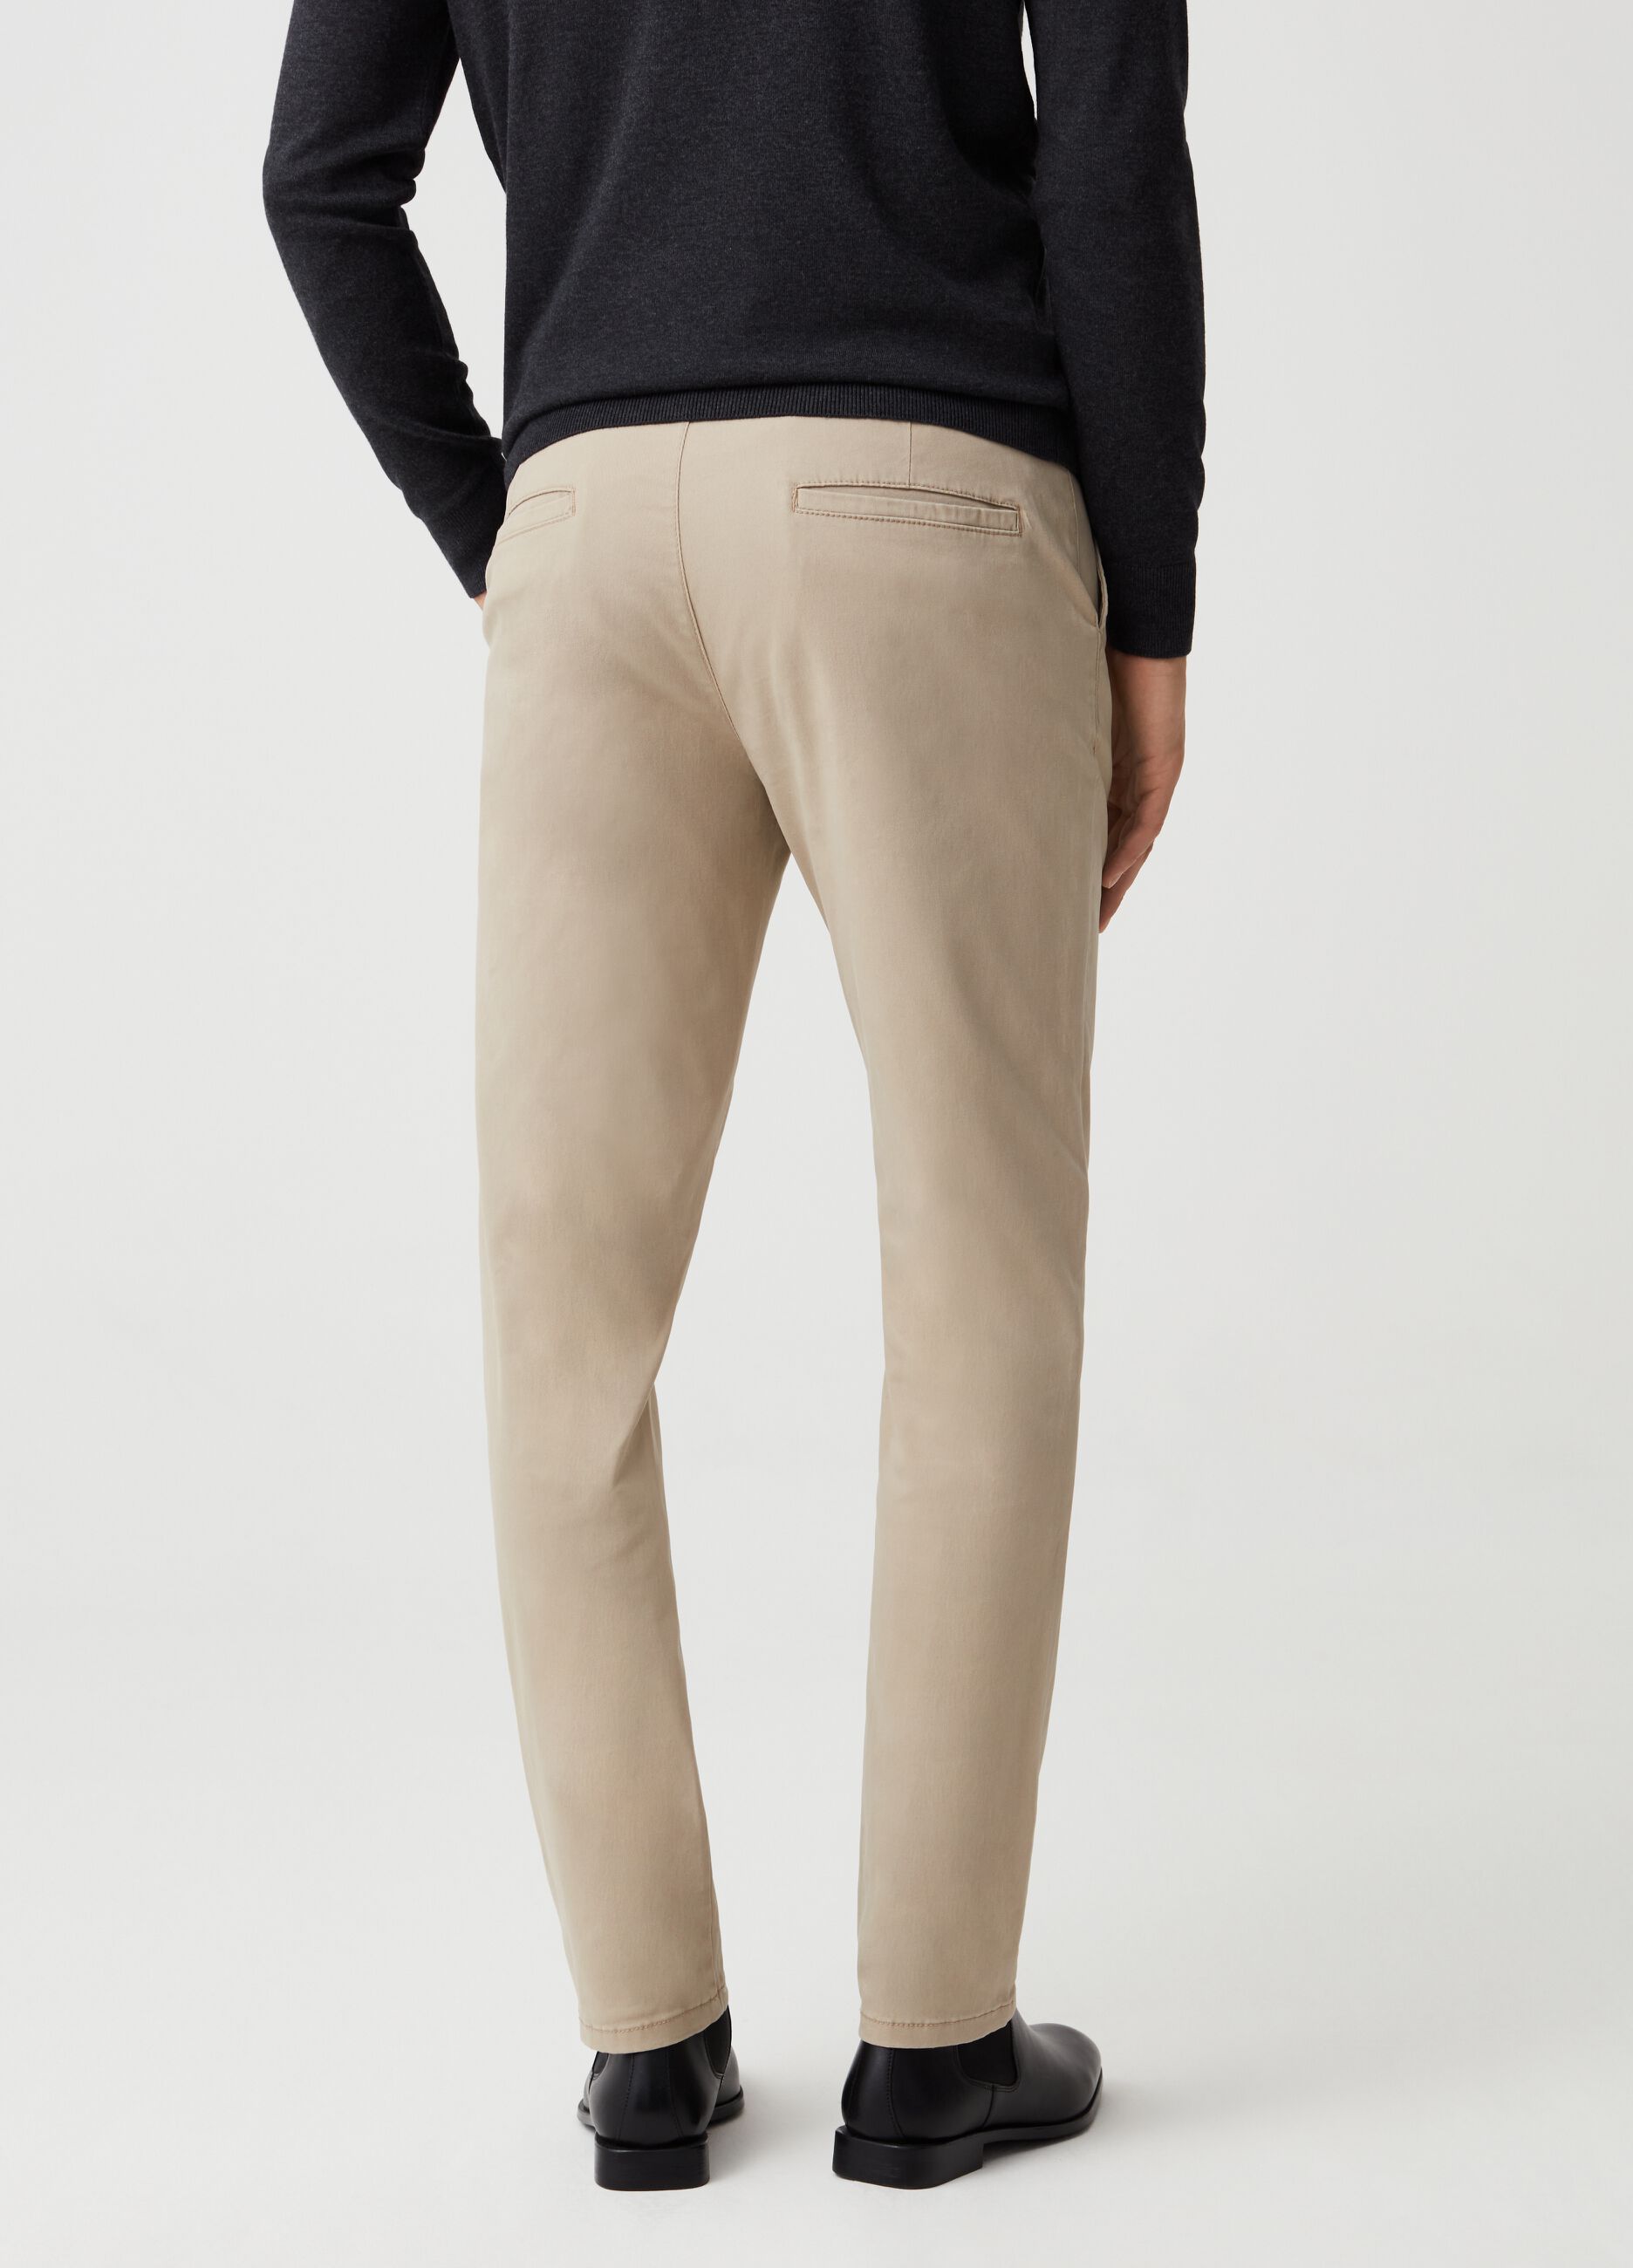 Solid colour chinos